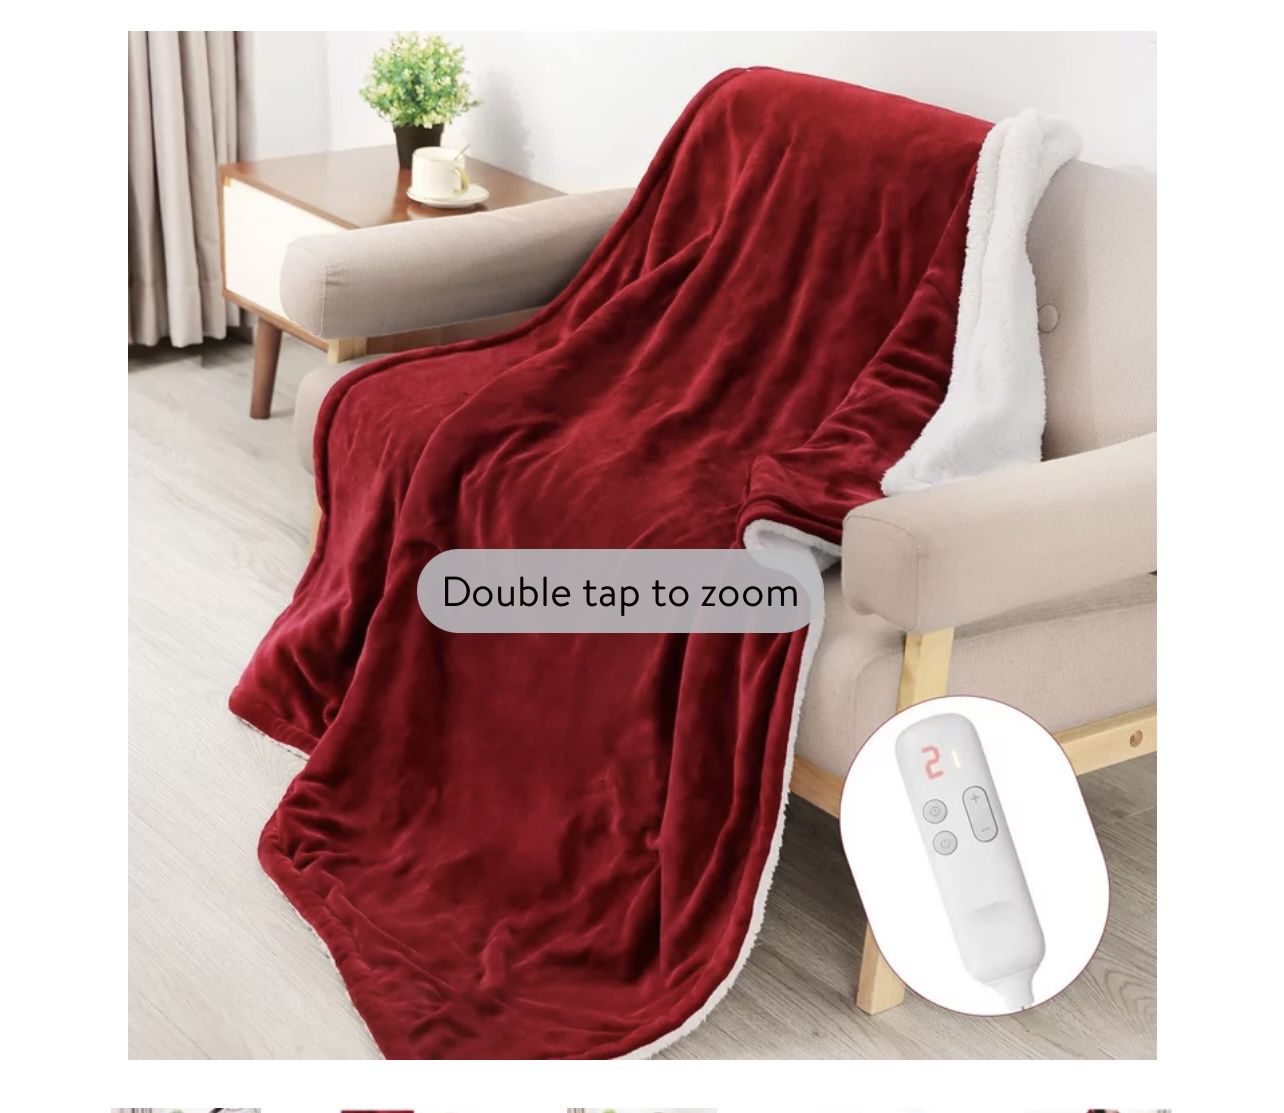 New Electric Blanket Heated Throw, Blanket 50" x 60", Flannel, Fast Heating, Machine Washable, ETL Certification, with 6 Heating Levels & 5 Hours Auto